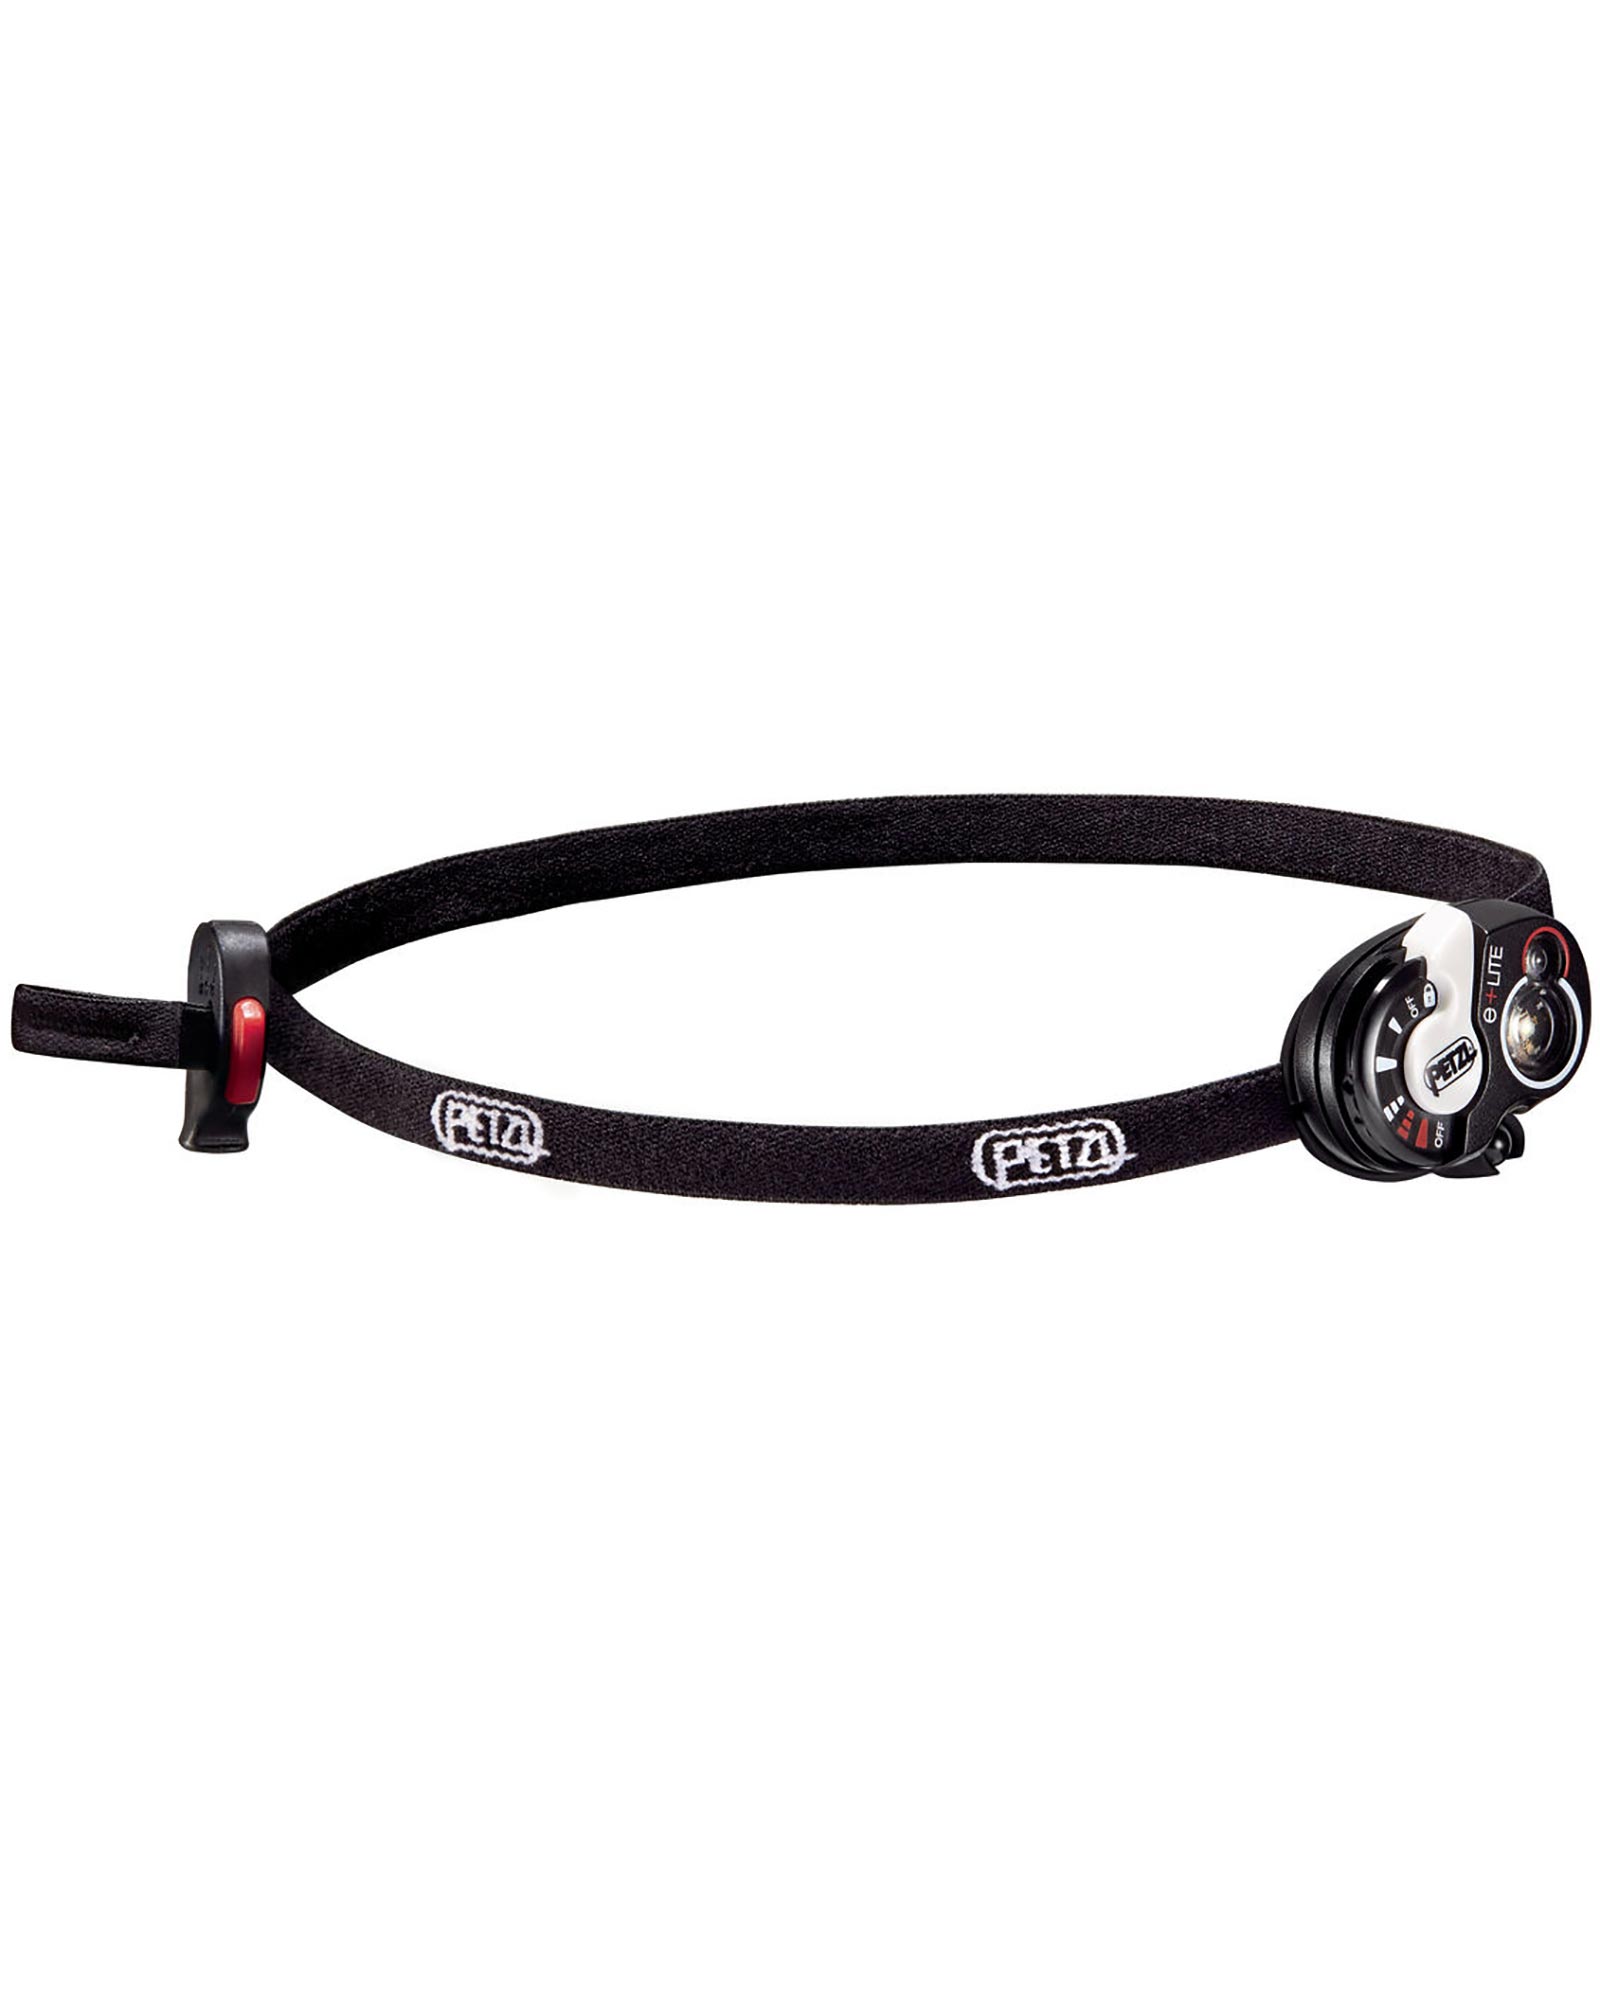 Product image of Petzl e+LITe Head Torch